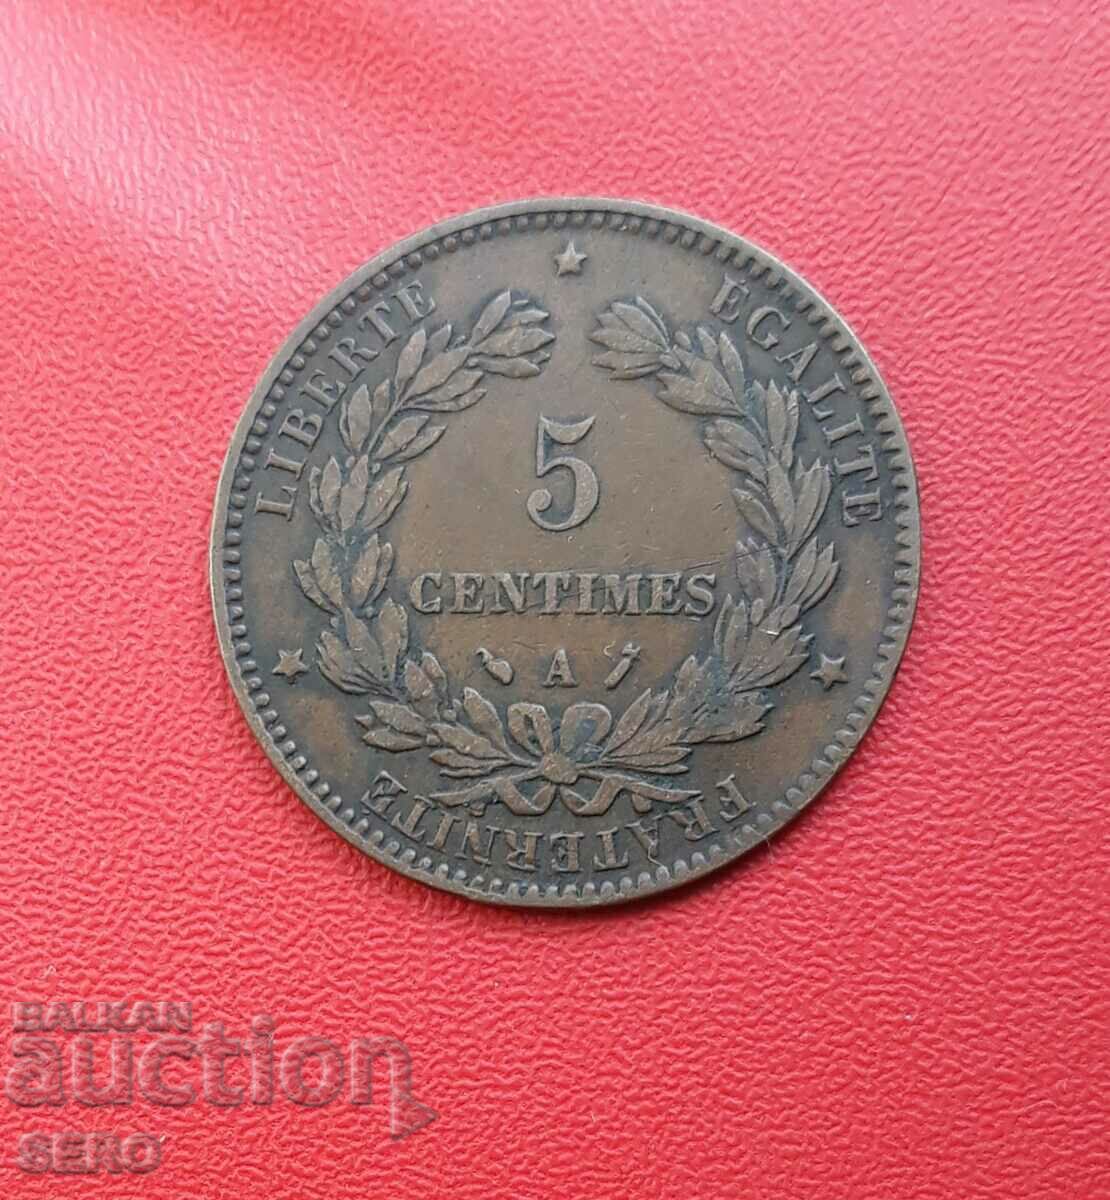 France-5 cents 1896-nicely preserved